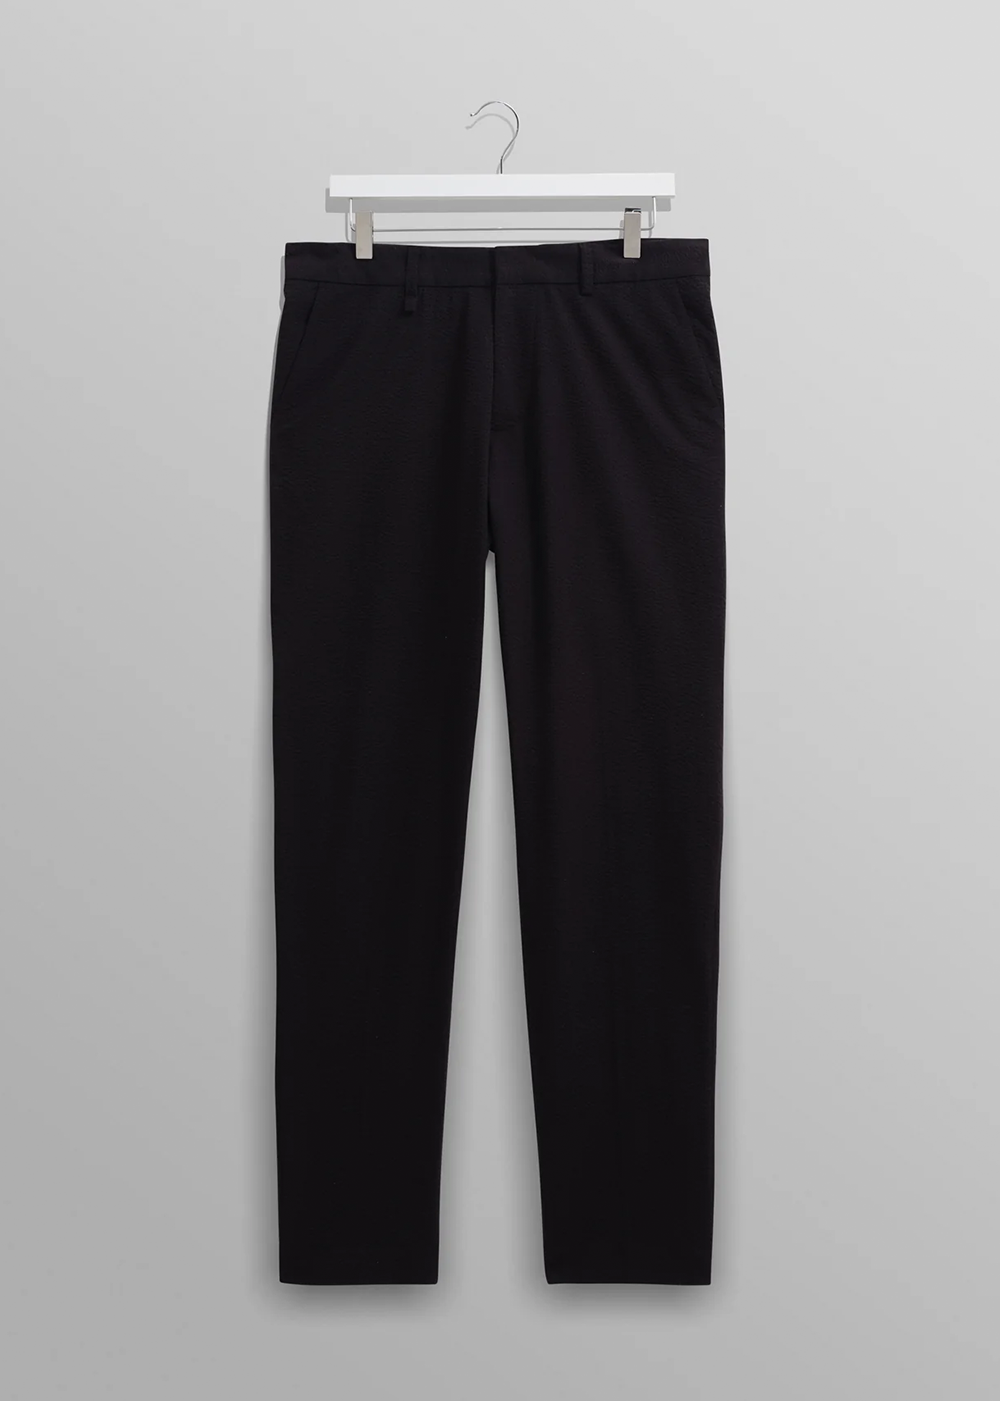 Front view of the Alp Trousers by Wax London in Black Seersucker. Straight leg, with, fixed waistband, and back welt pockets.